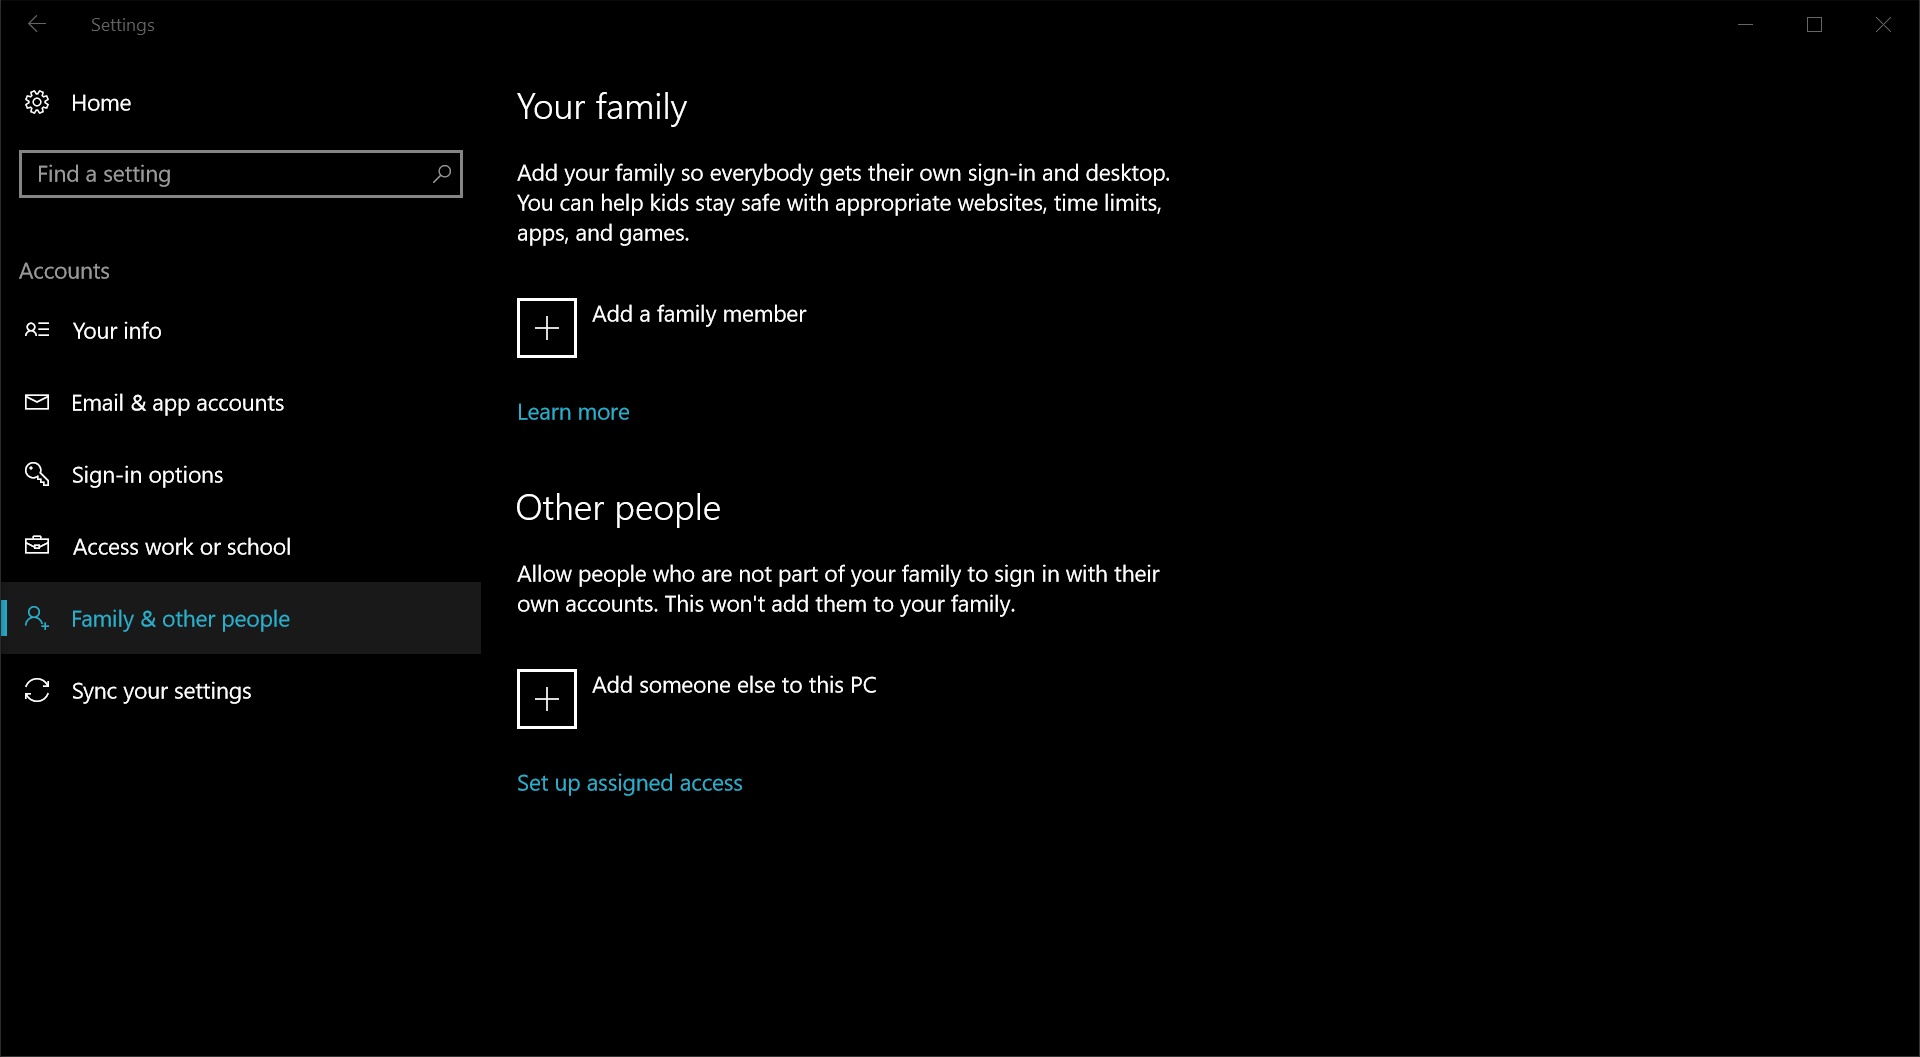 Creating local accounts on a Windows 10 PC for friends and family